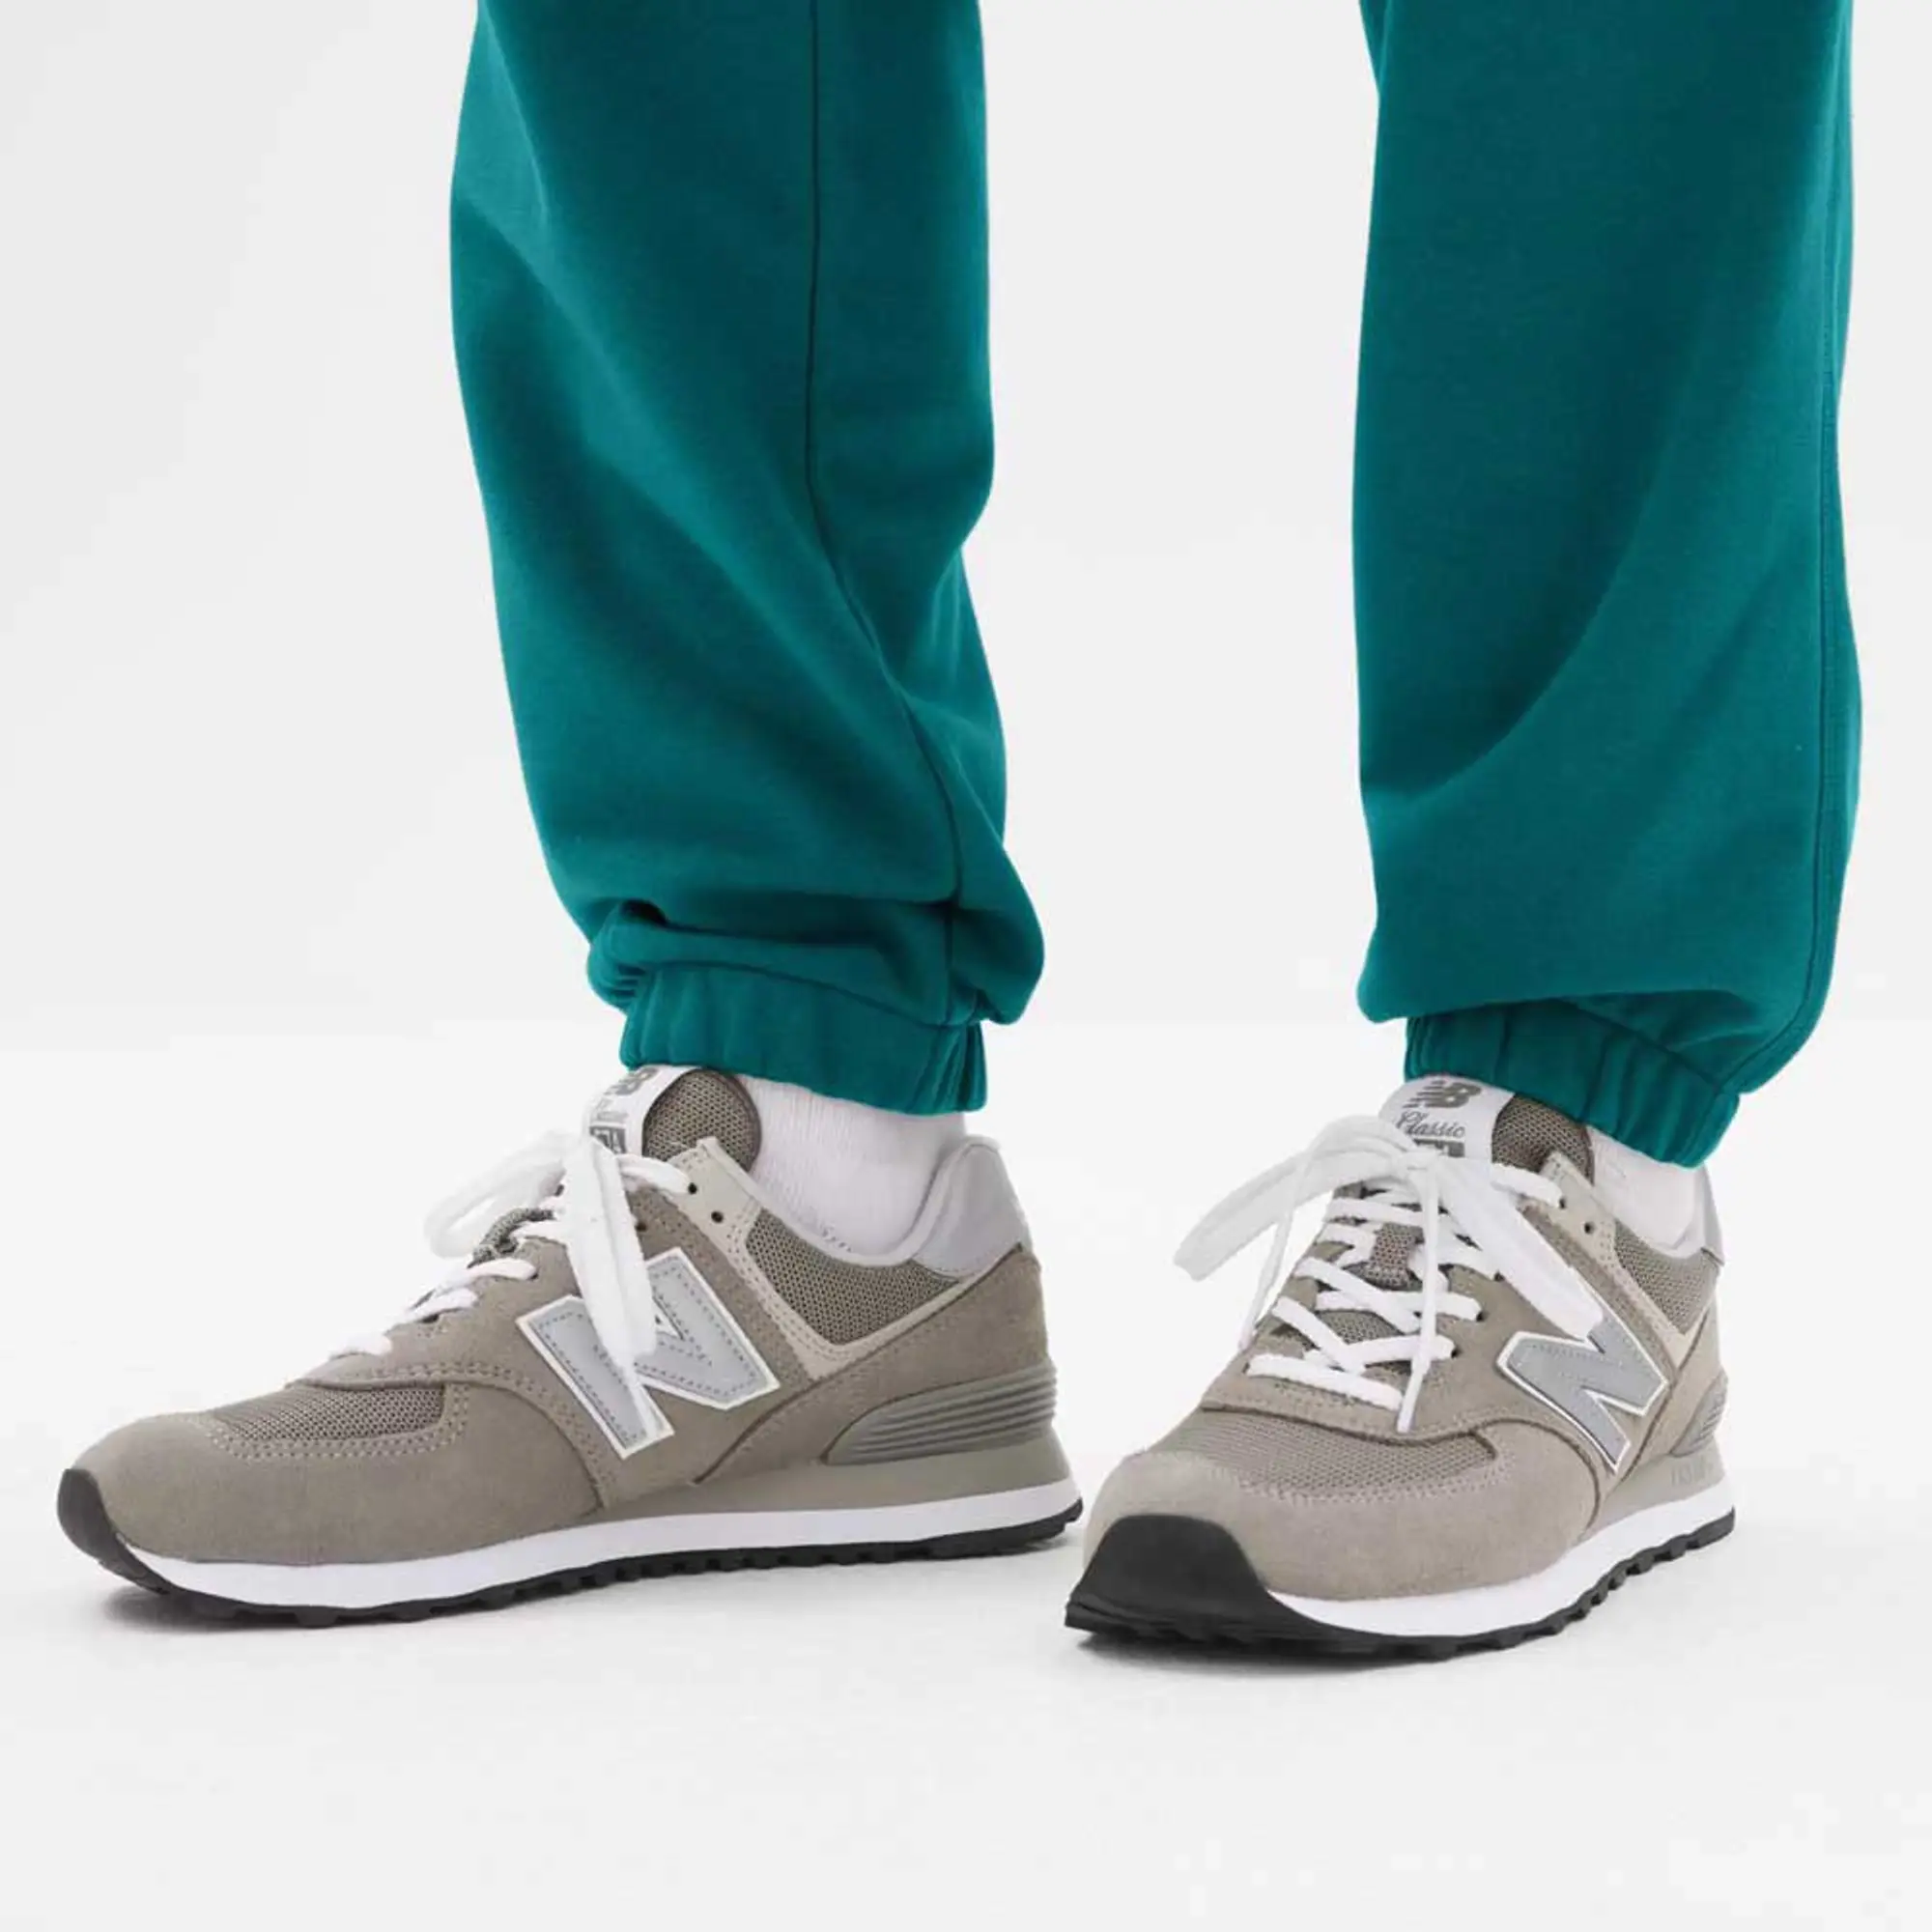 New Balance Uni-ssentials French Terry Sweatpants - Green, Green